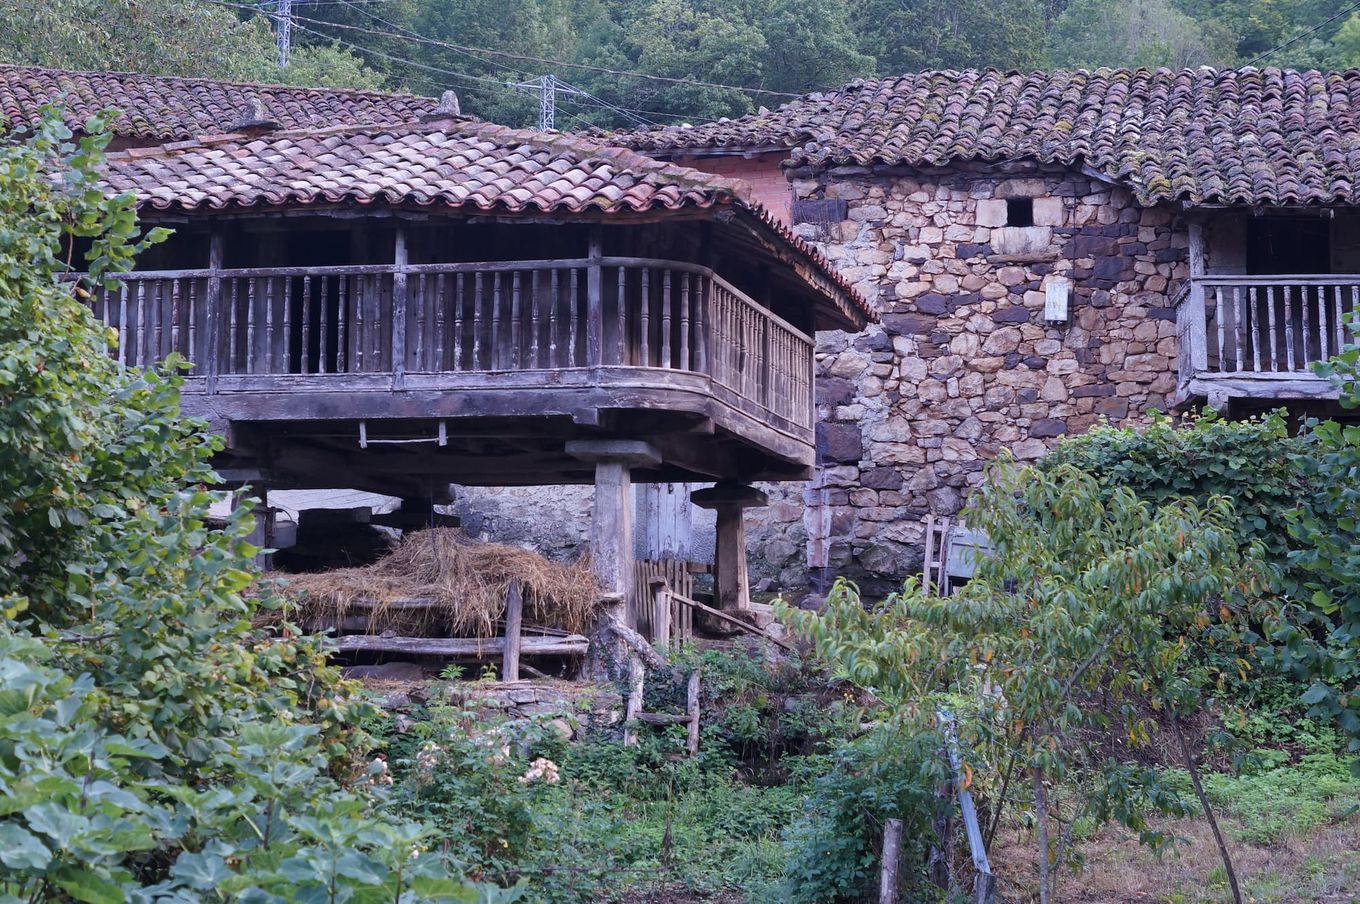 A traditional Asturian village with it's raised granaries, surrounded by lush green hills and mountains